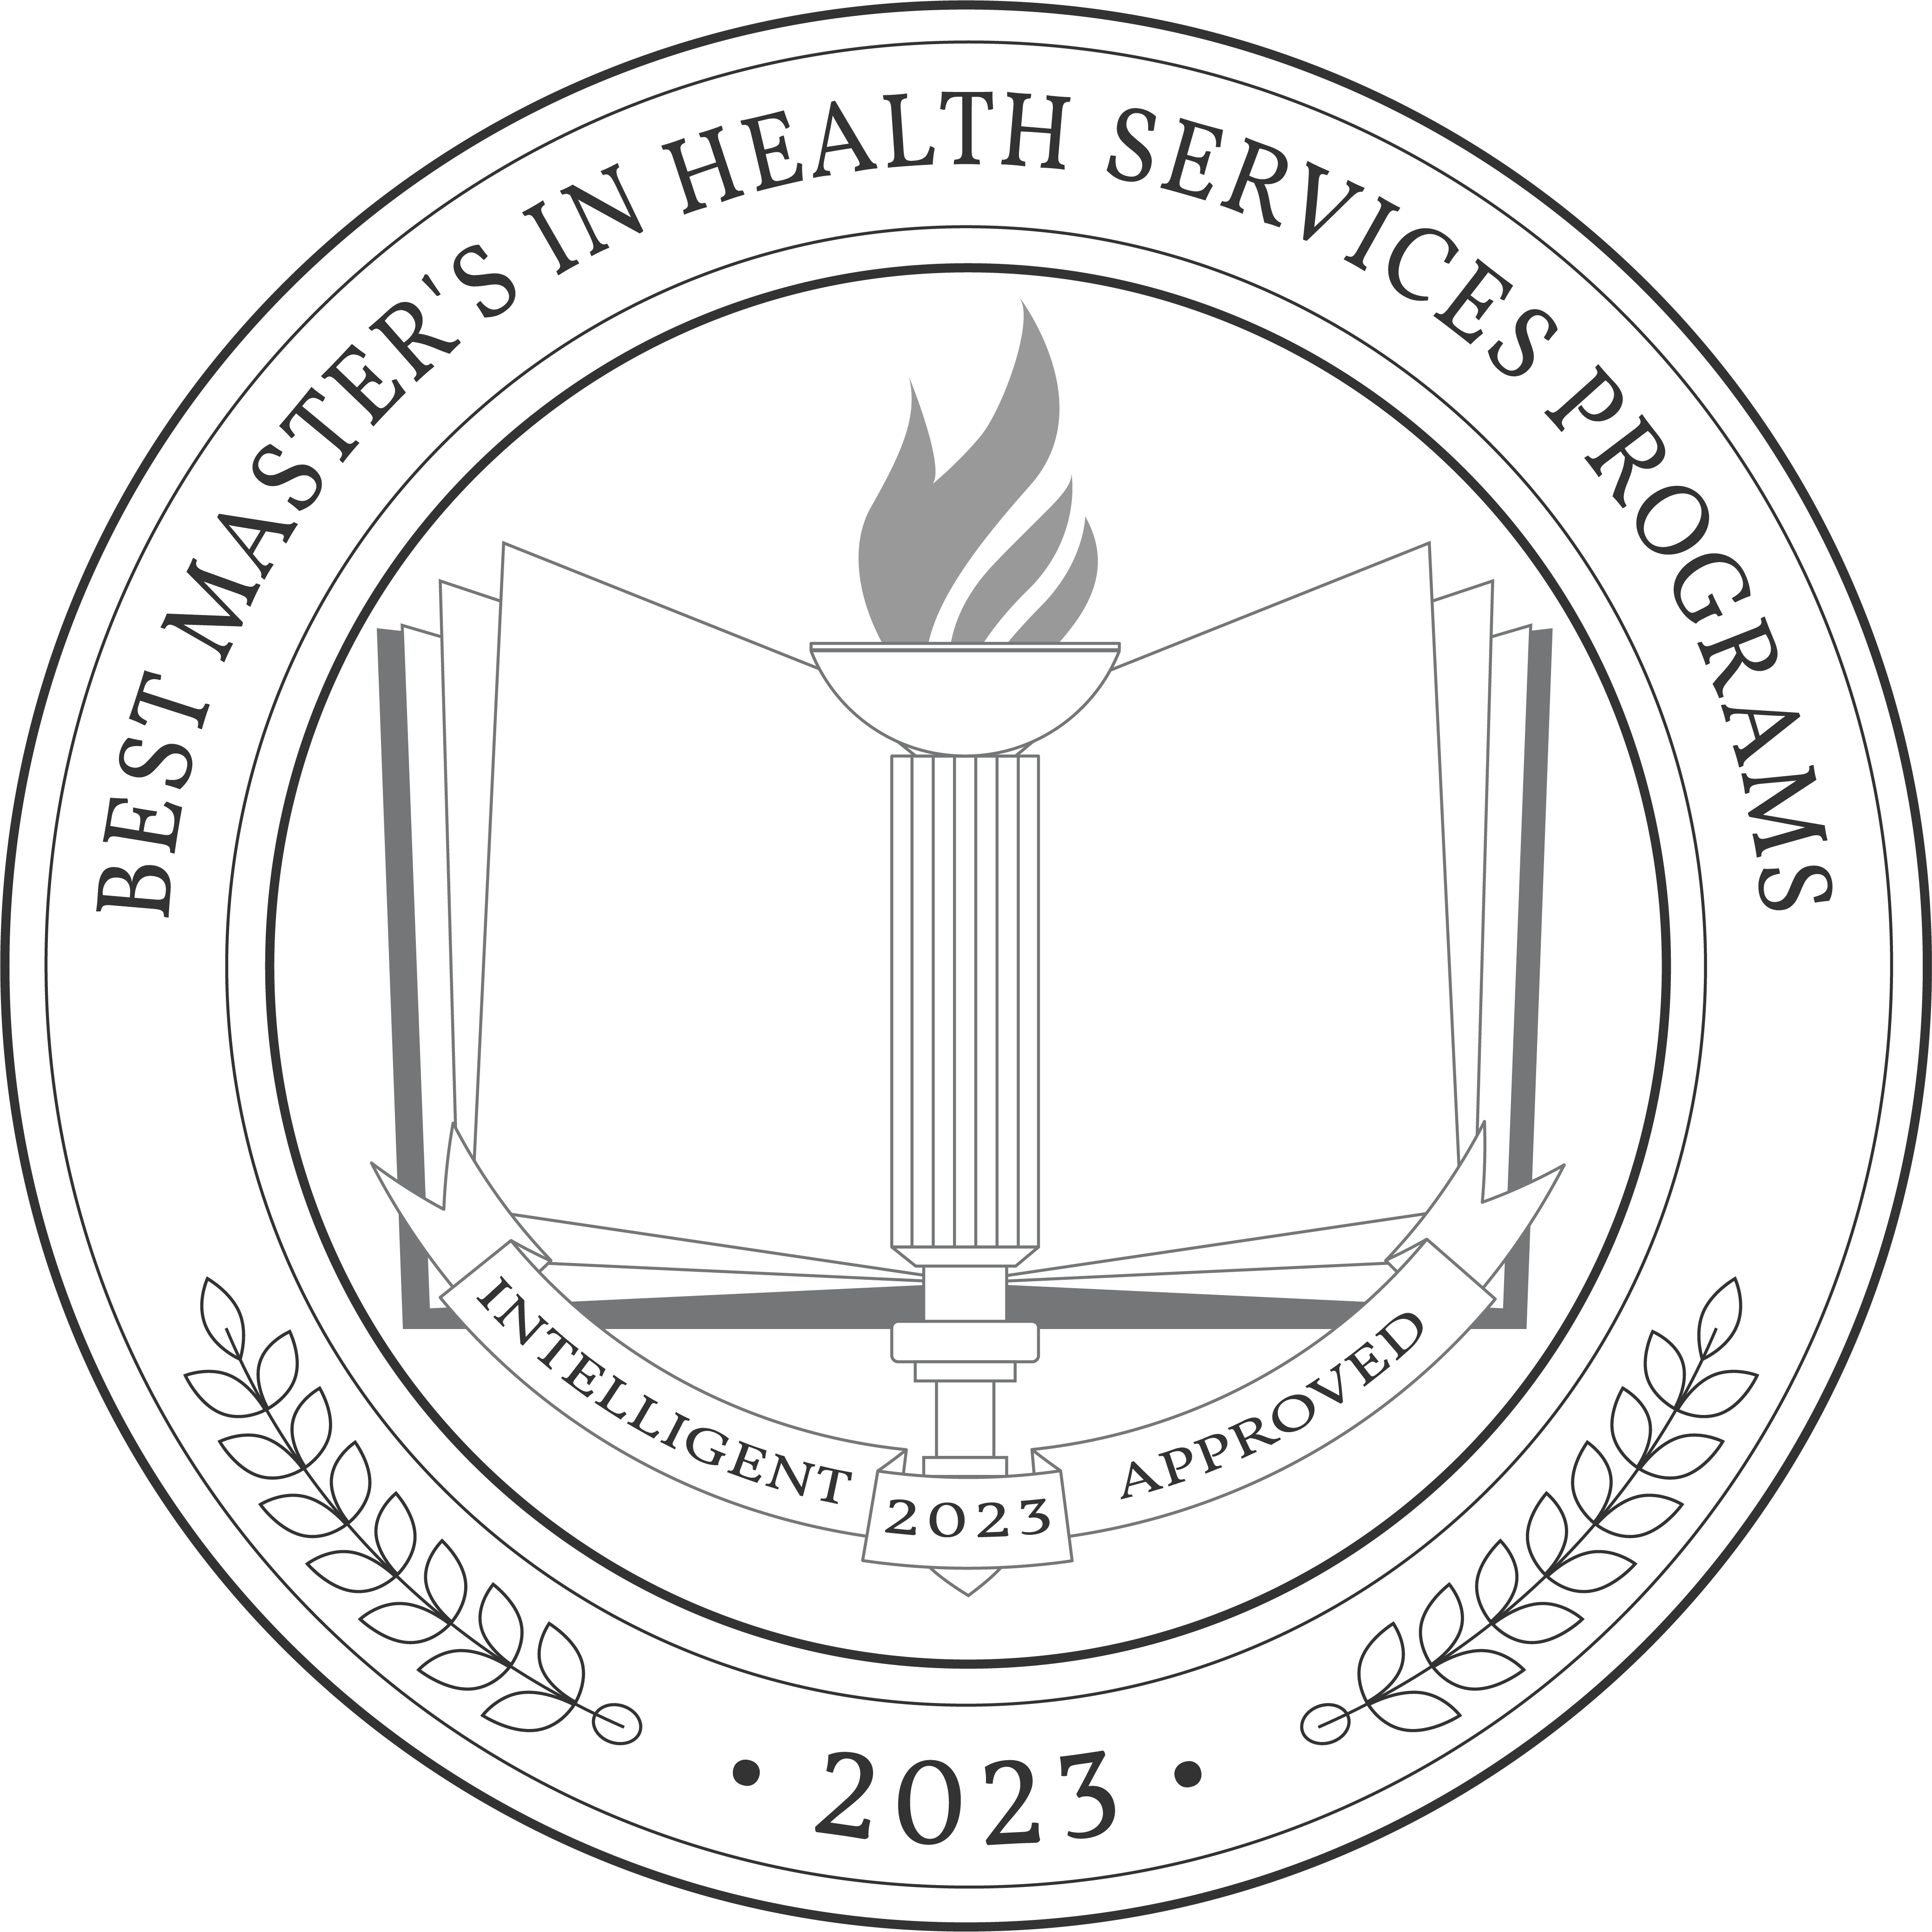 Best Master's in Health Services Programs badge